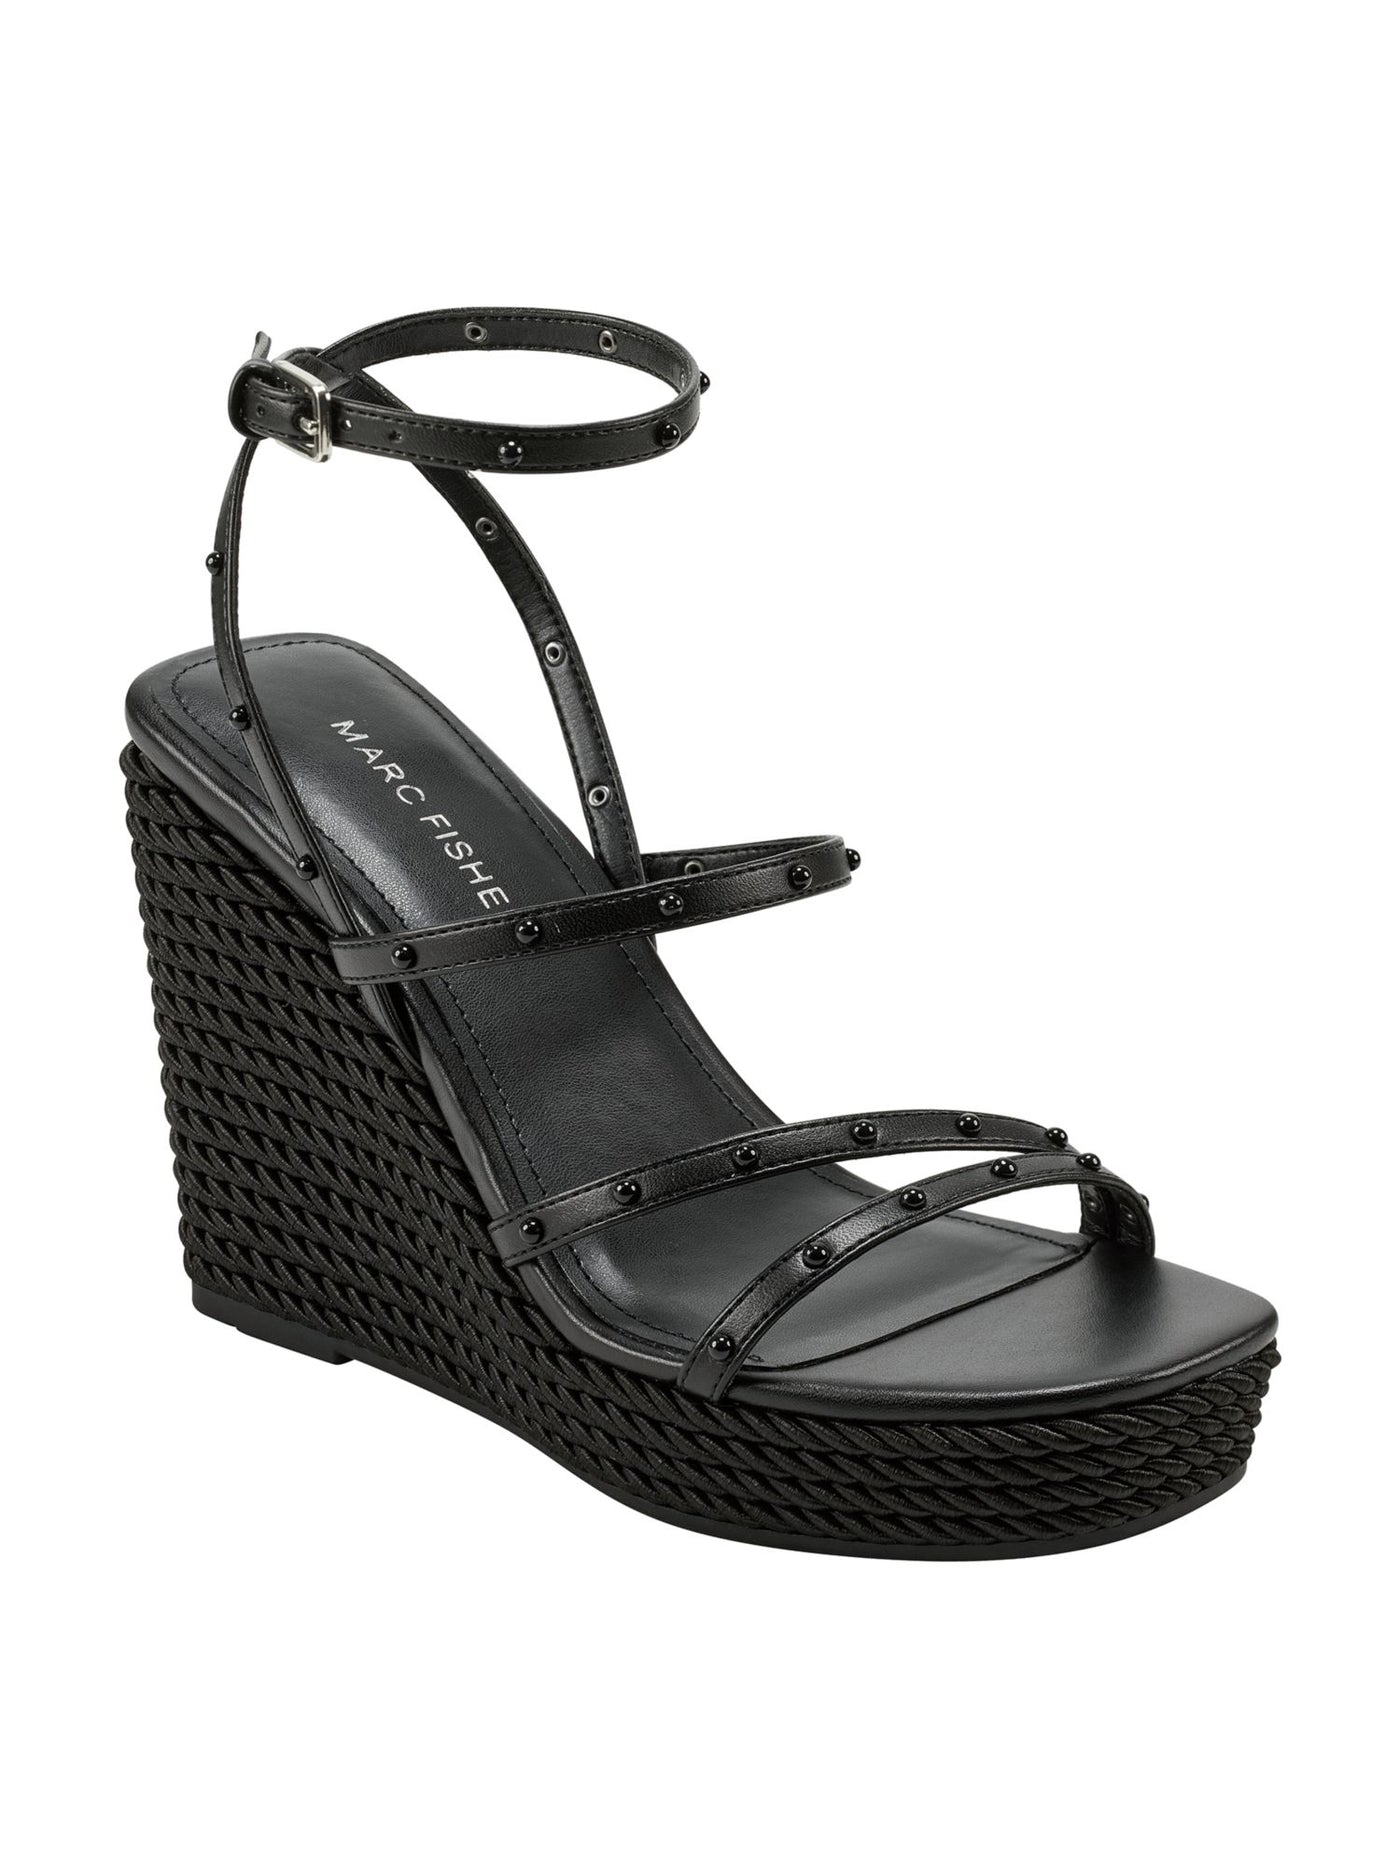 MARC FISHER Womens Black Strappy Studded Zig Square Toe Wedge Buckle Heeled Sandal 7.5 M